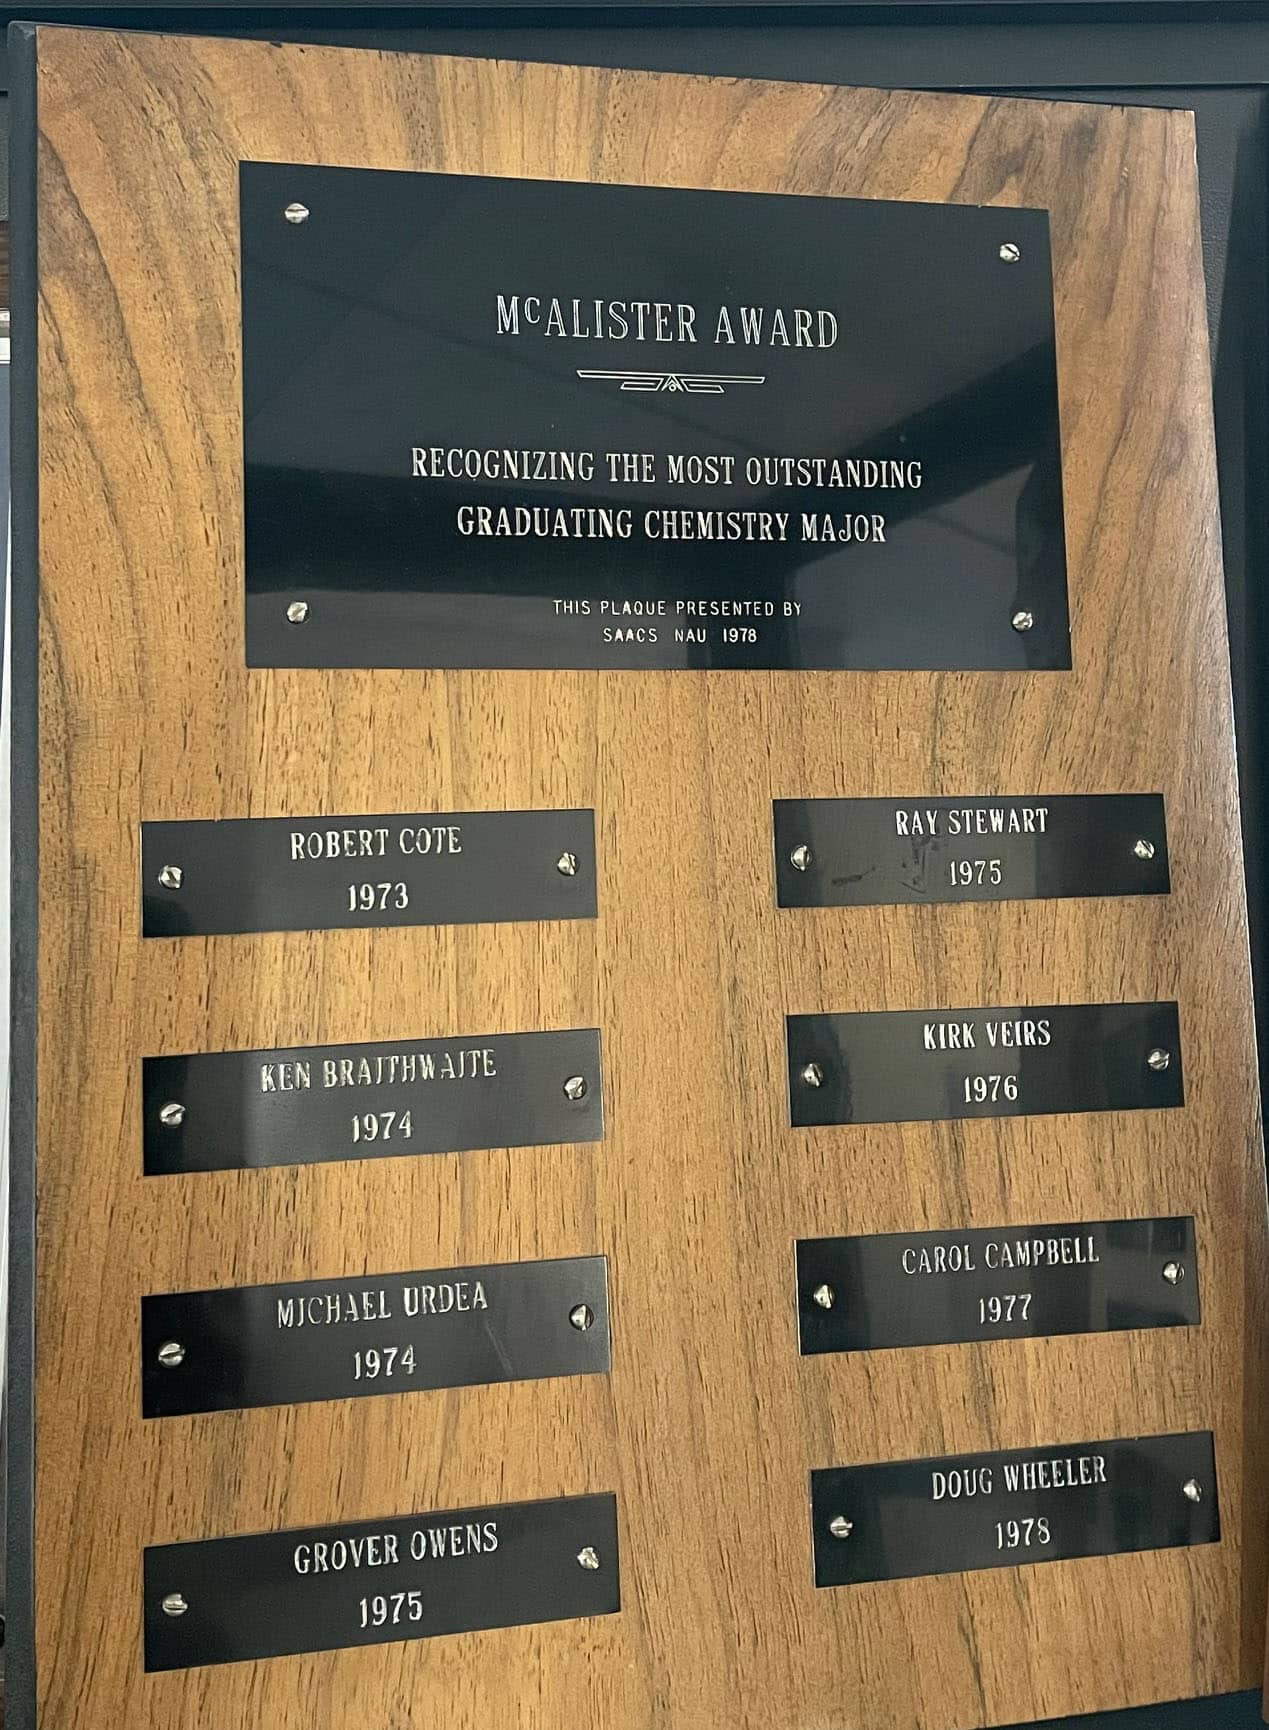 McAlister Award plaque with a list of several students' names.